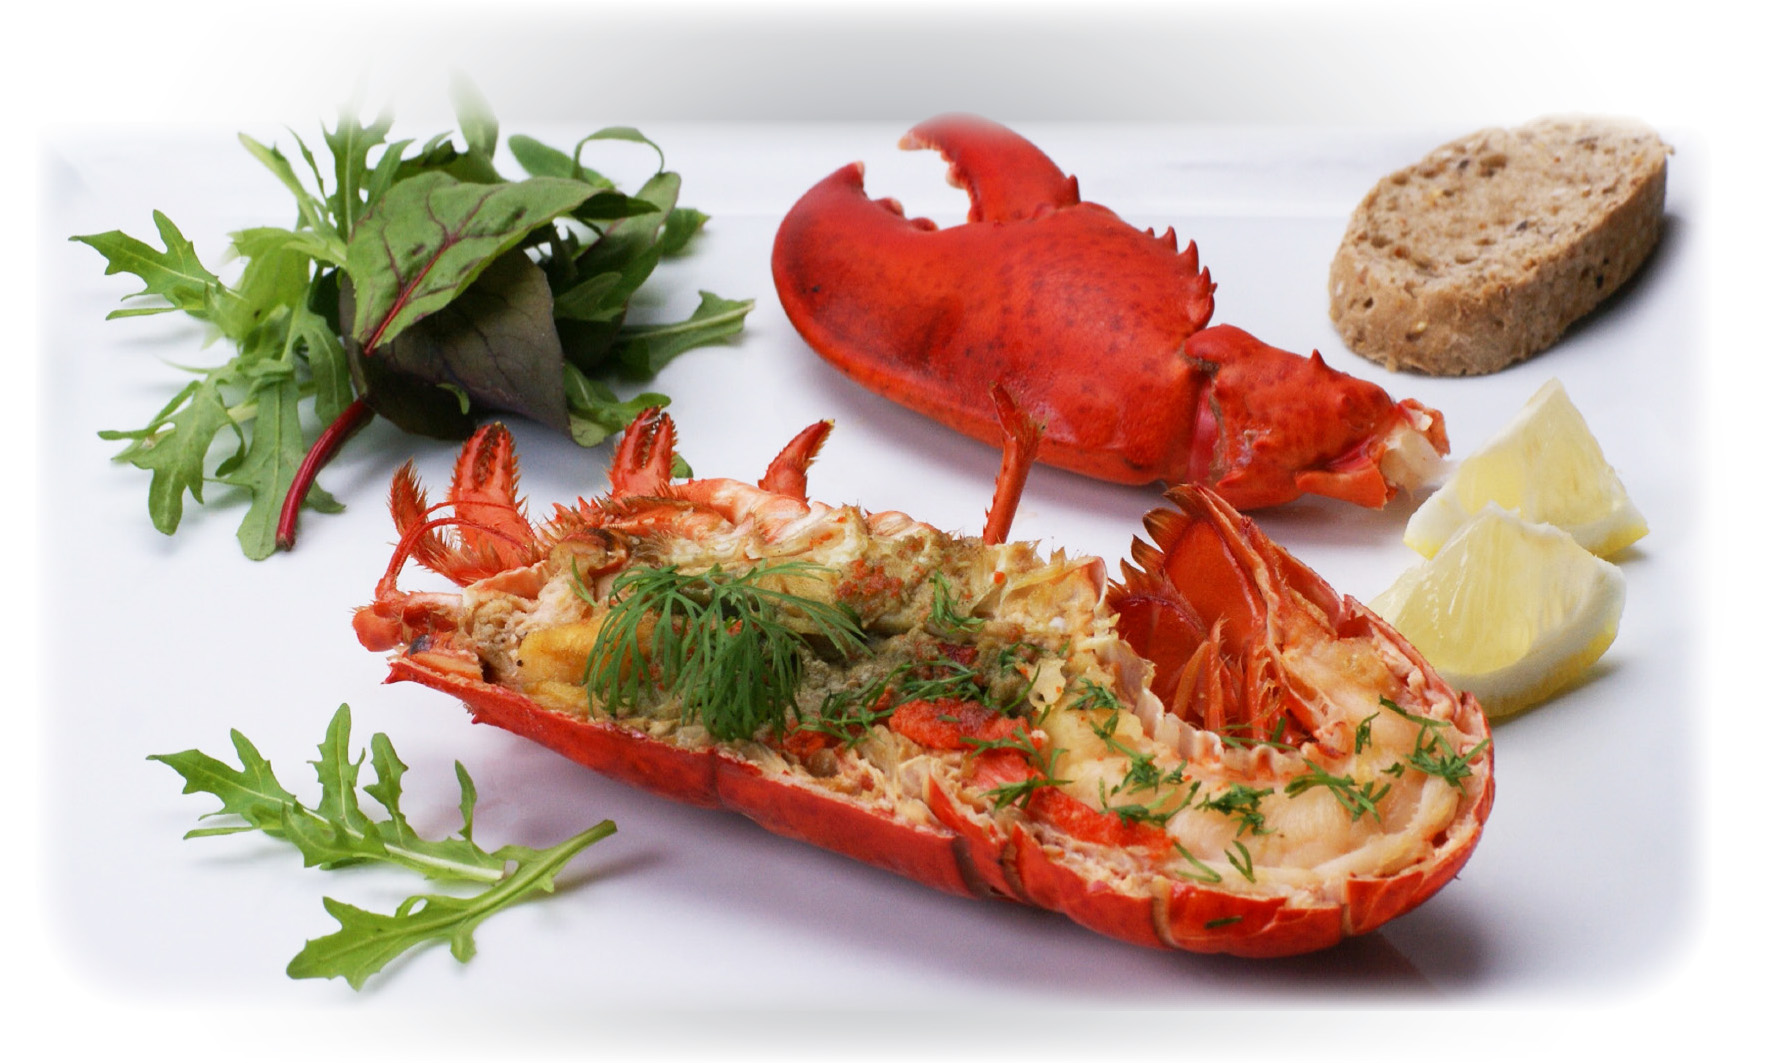 Shellfish - Recipes Oven-baked lobster with garlic butter salad